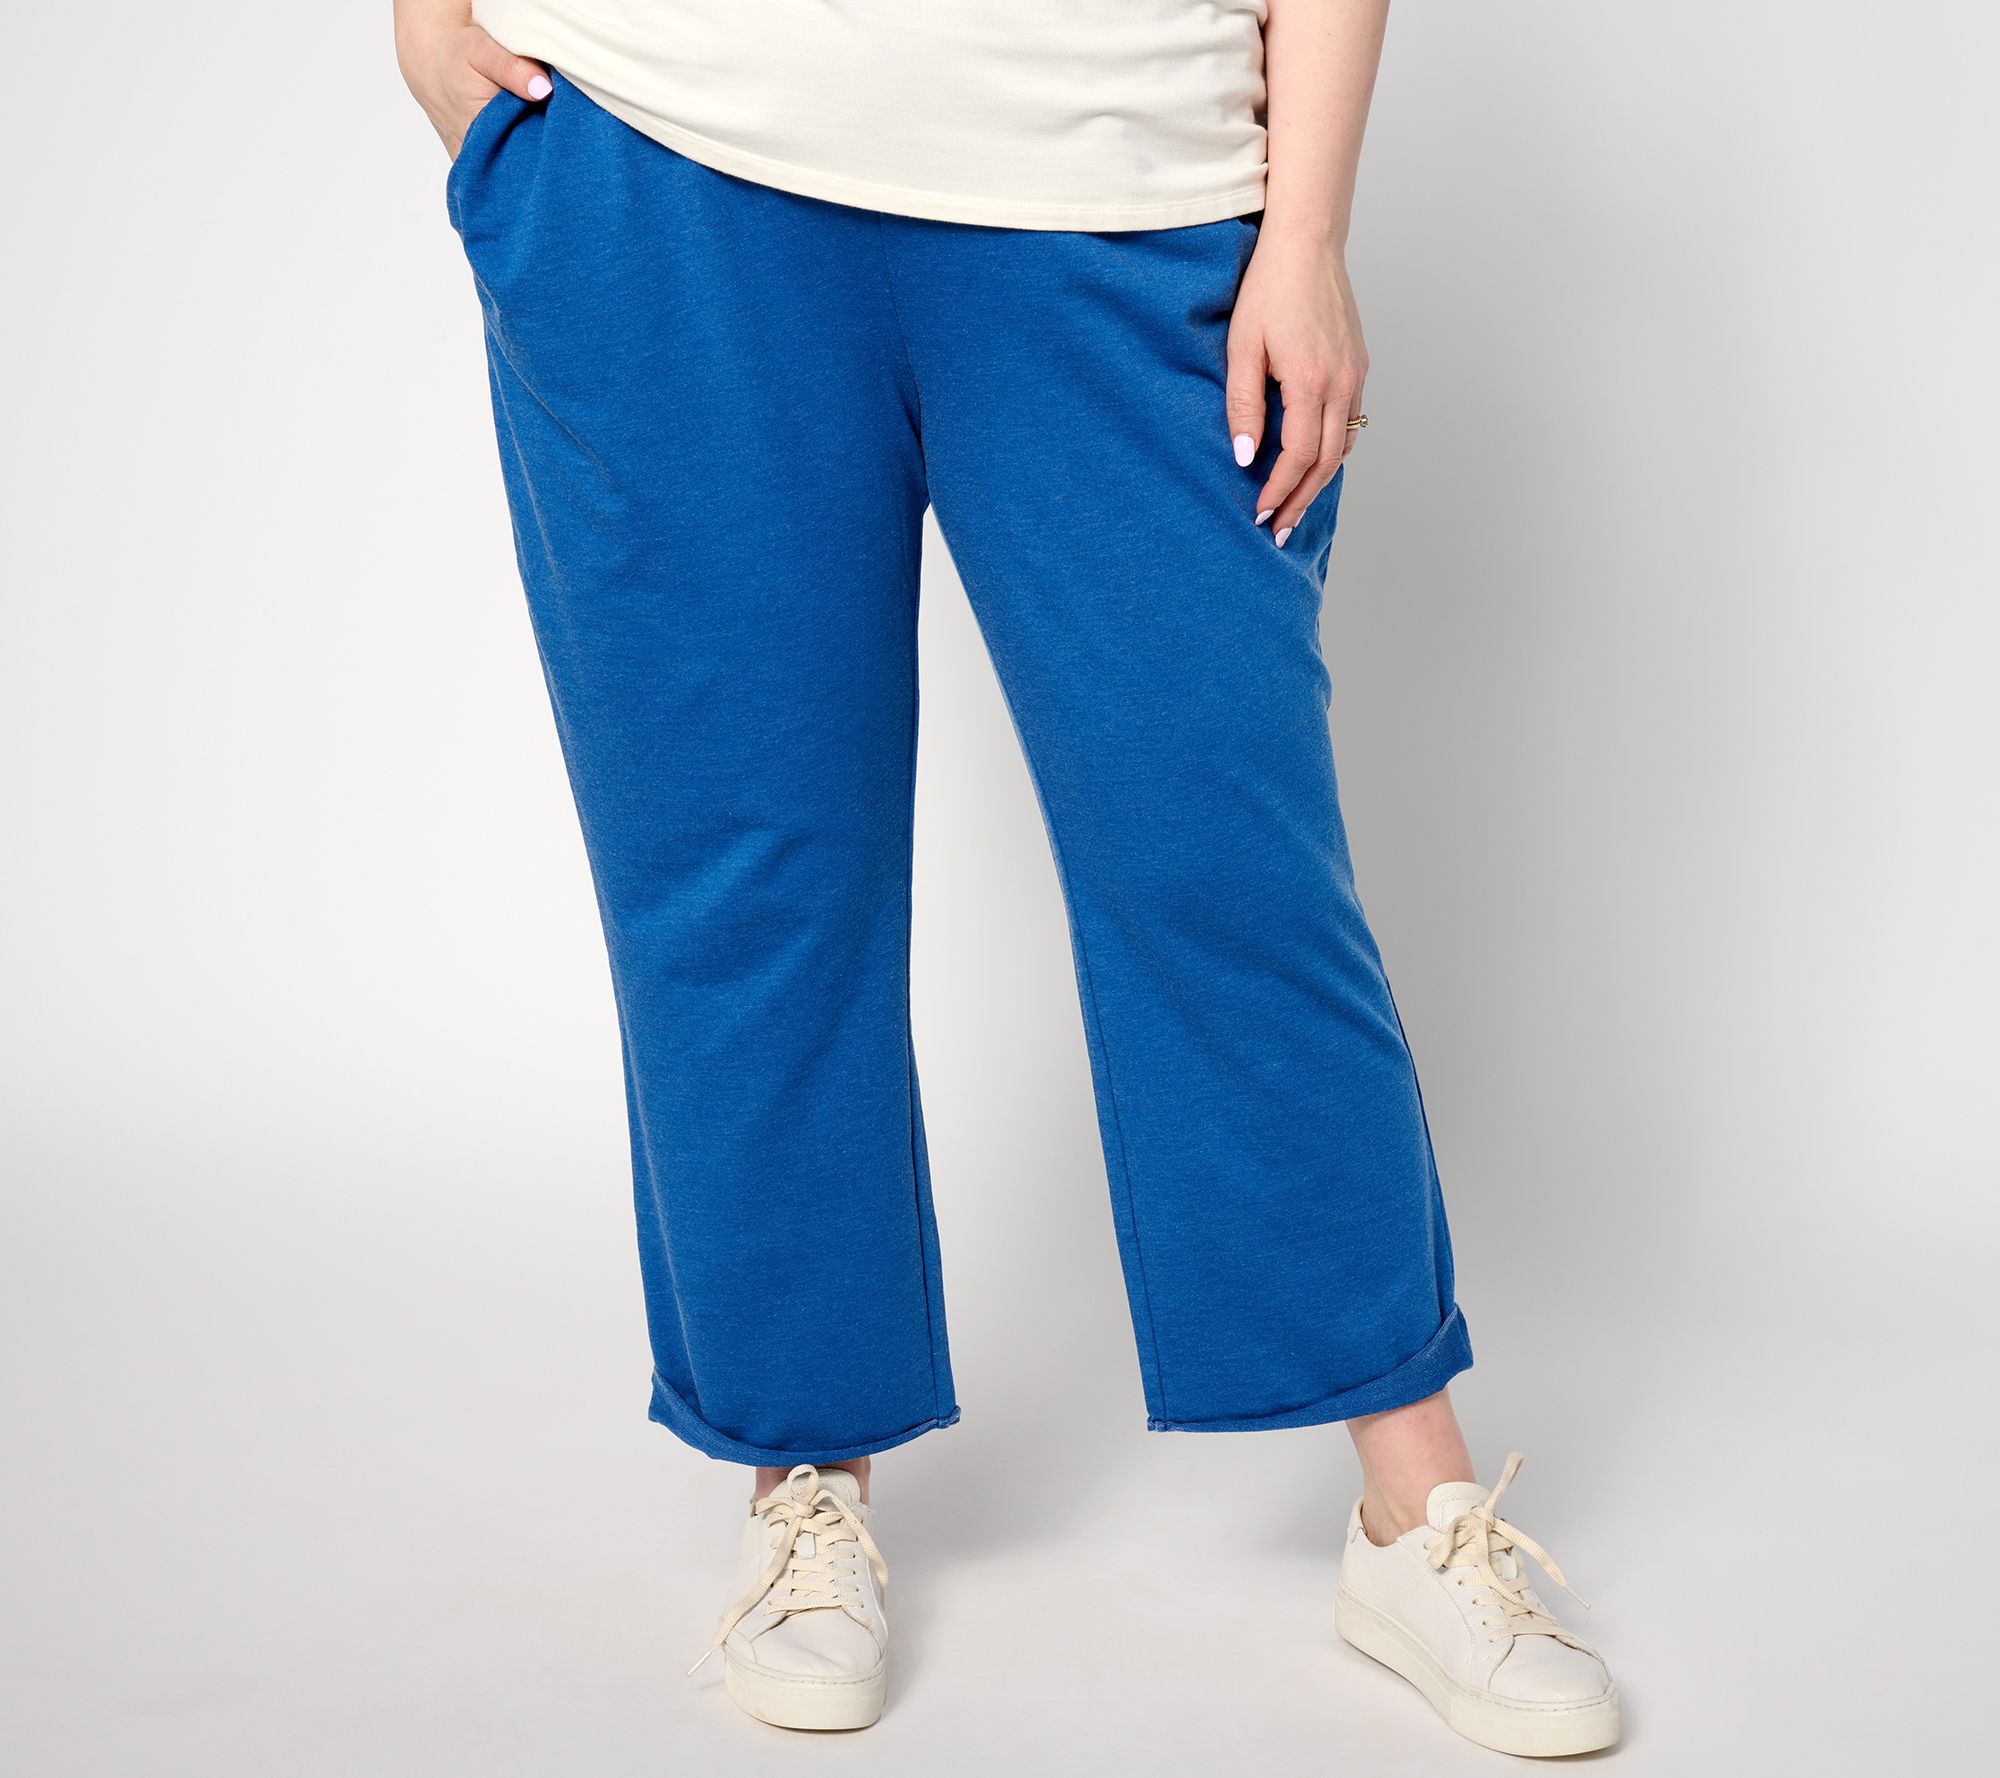 Colsie French Terry Lounge Jogger Pants, Hoodie, and Seamless